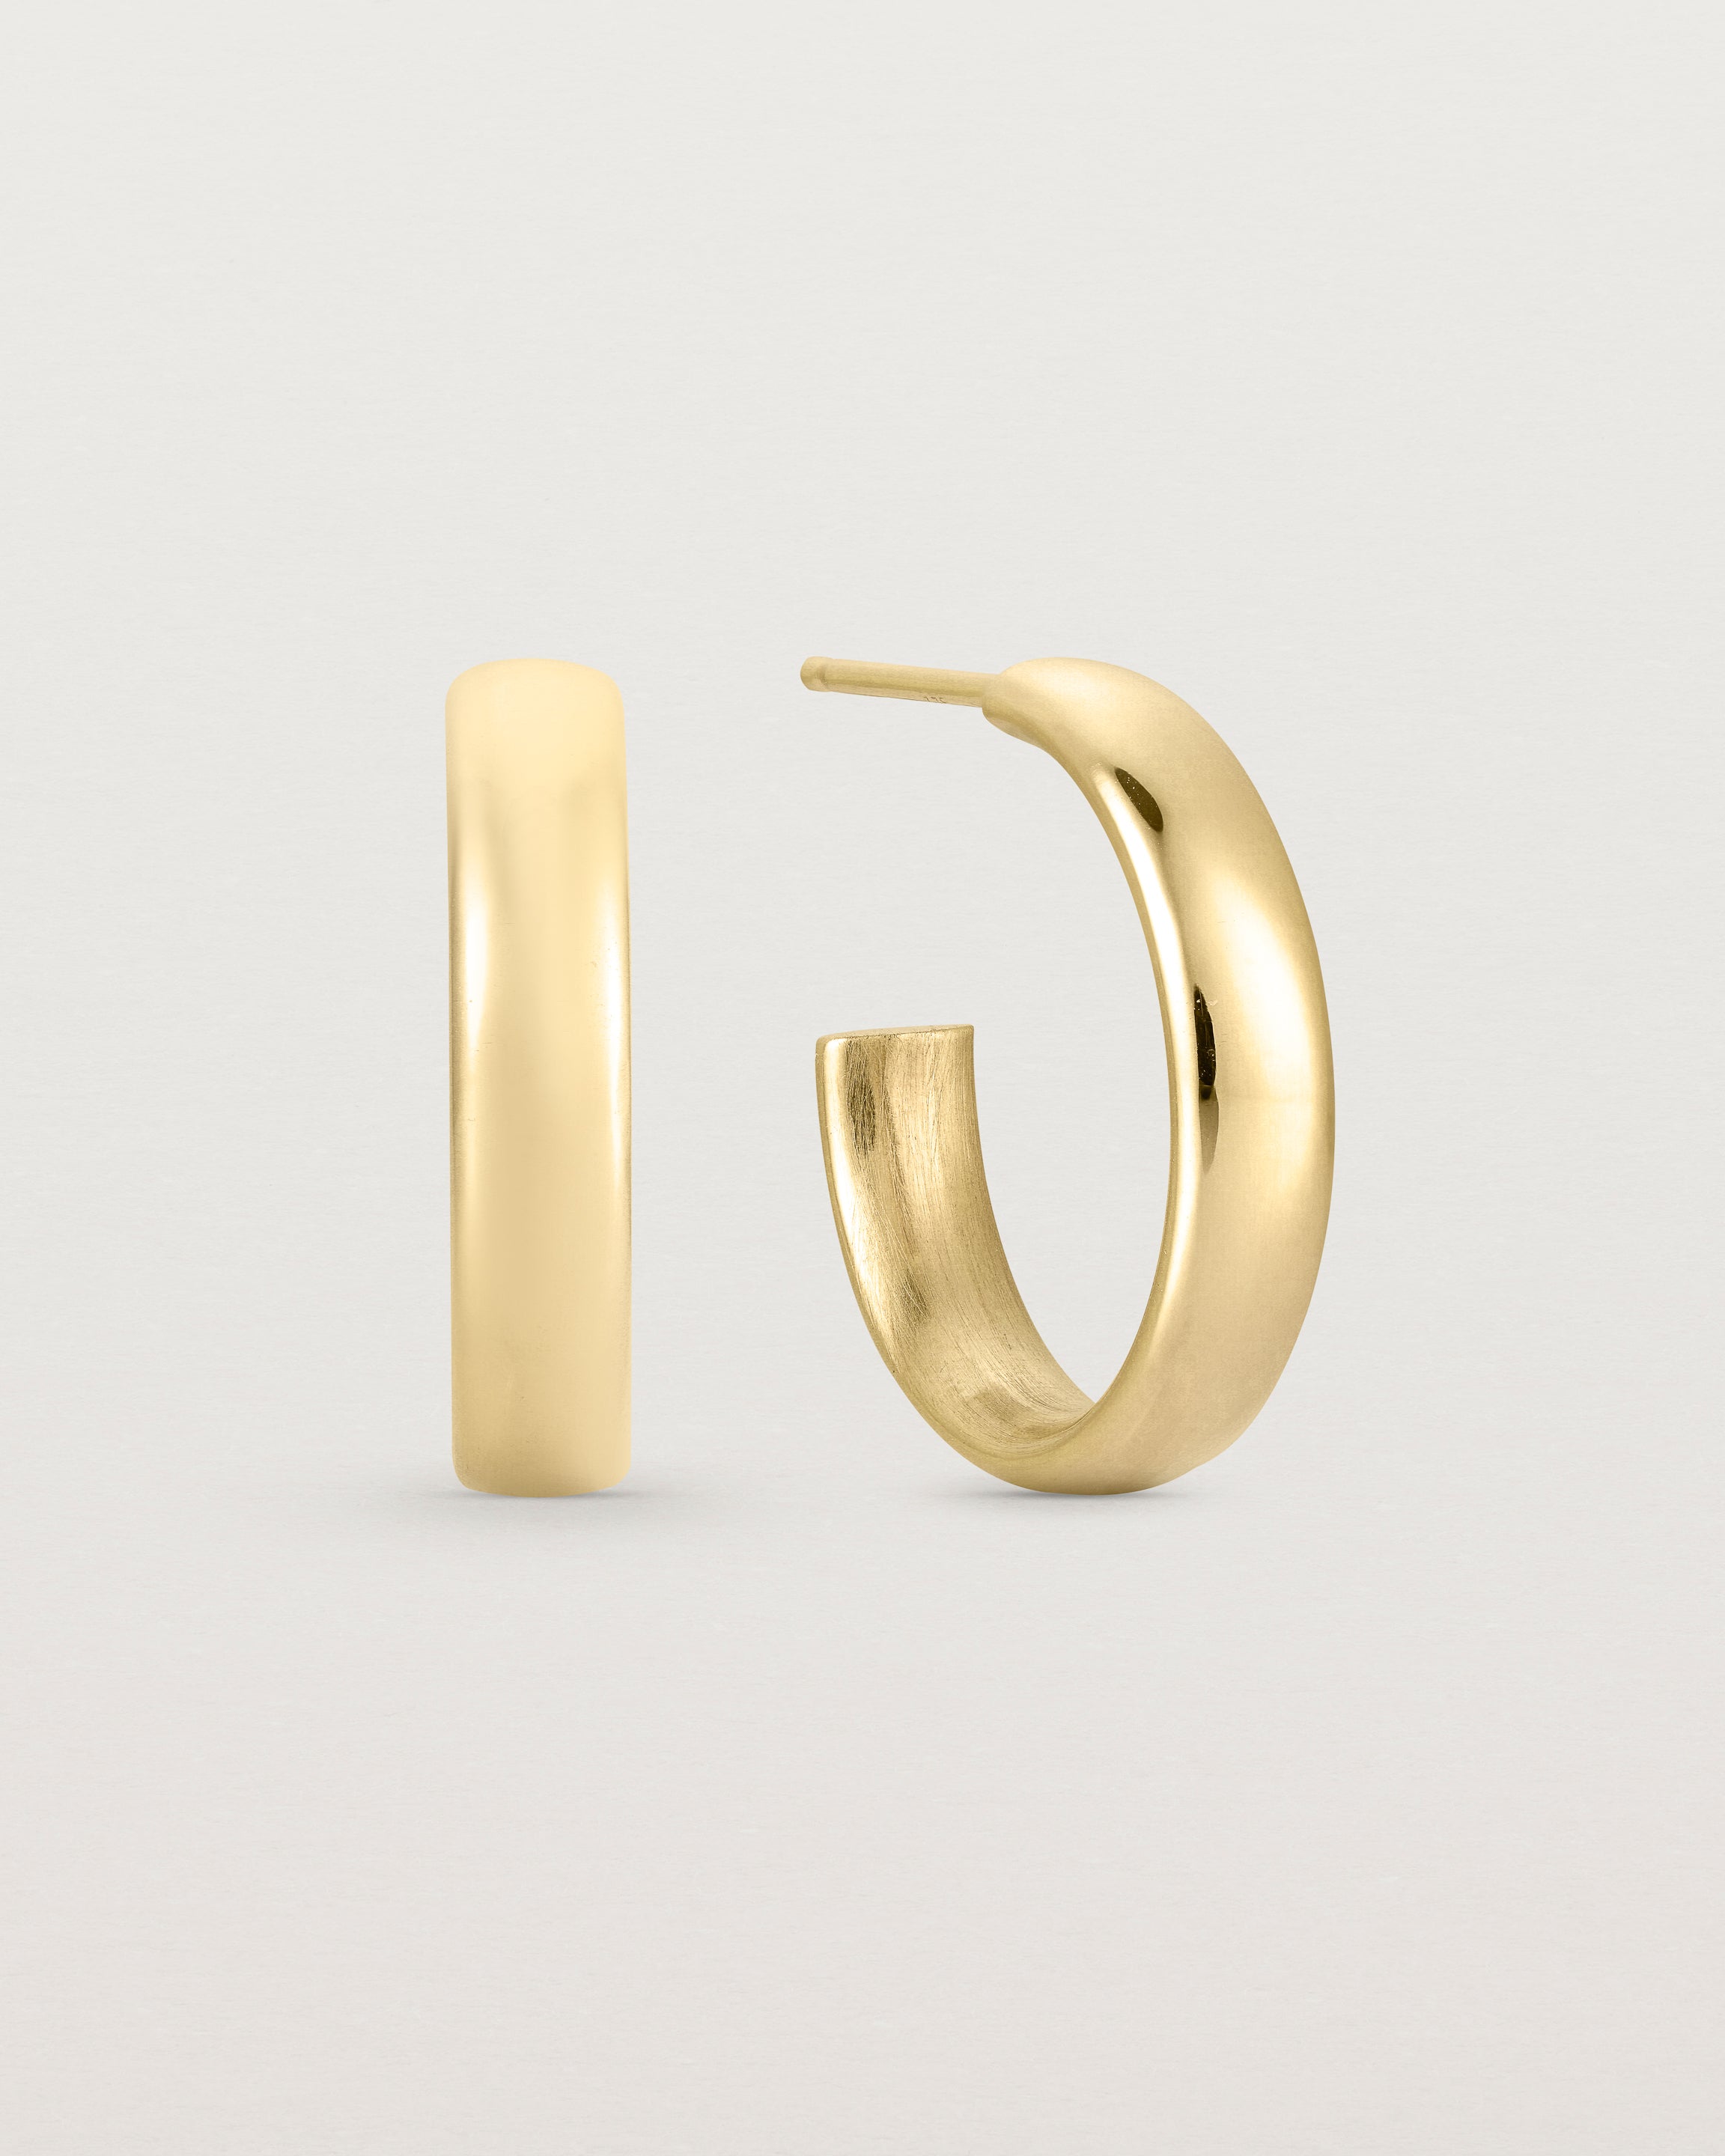 A pair of Ellipse Hoops | Yellow Gold.